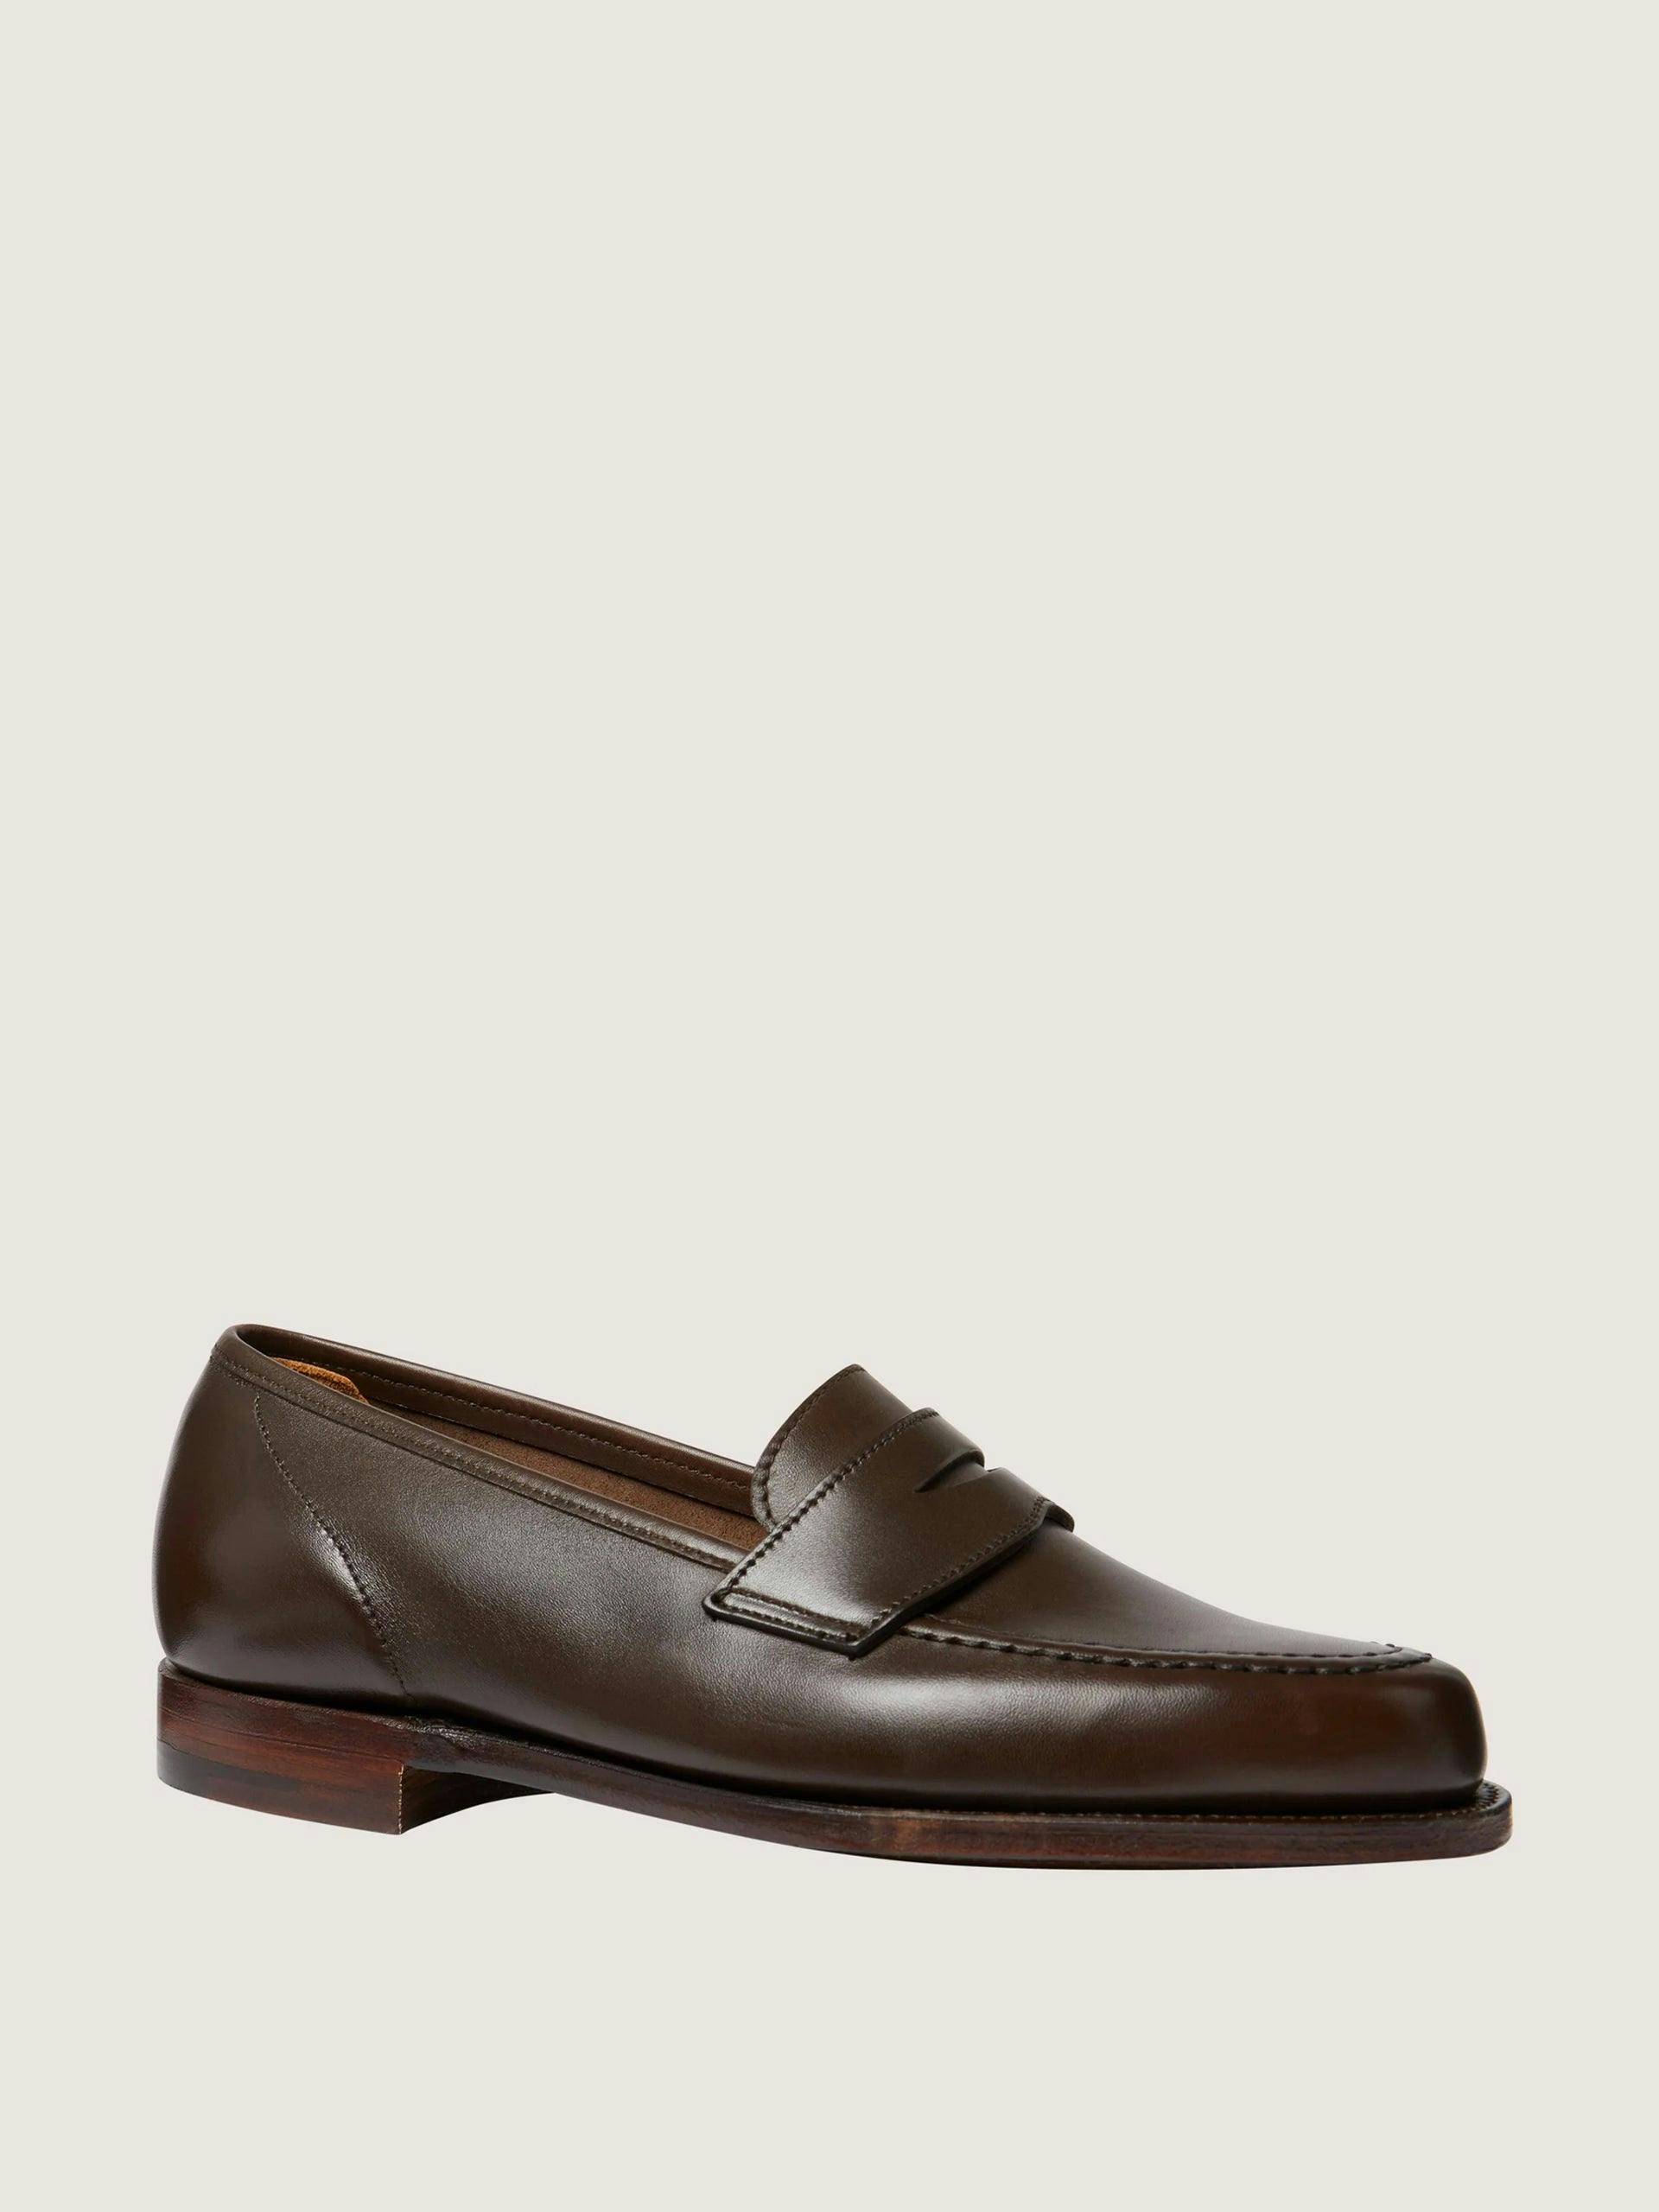 Unlined waxed penny loafers